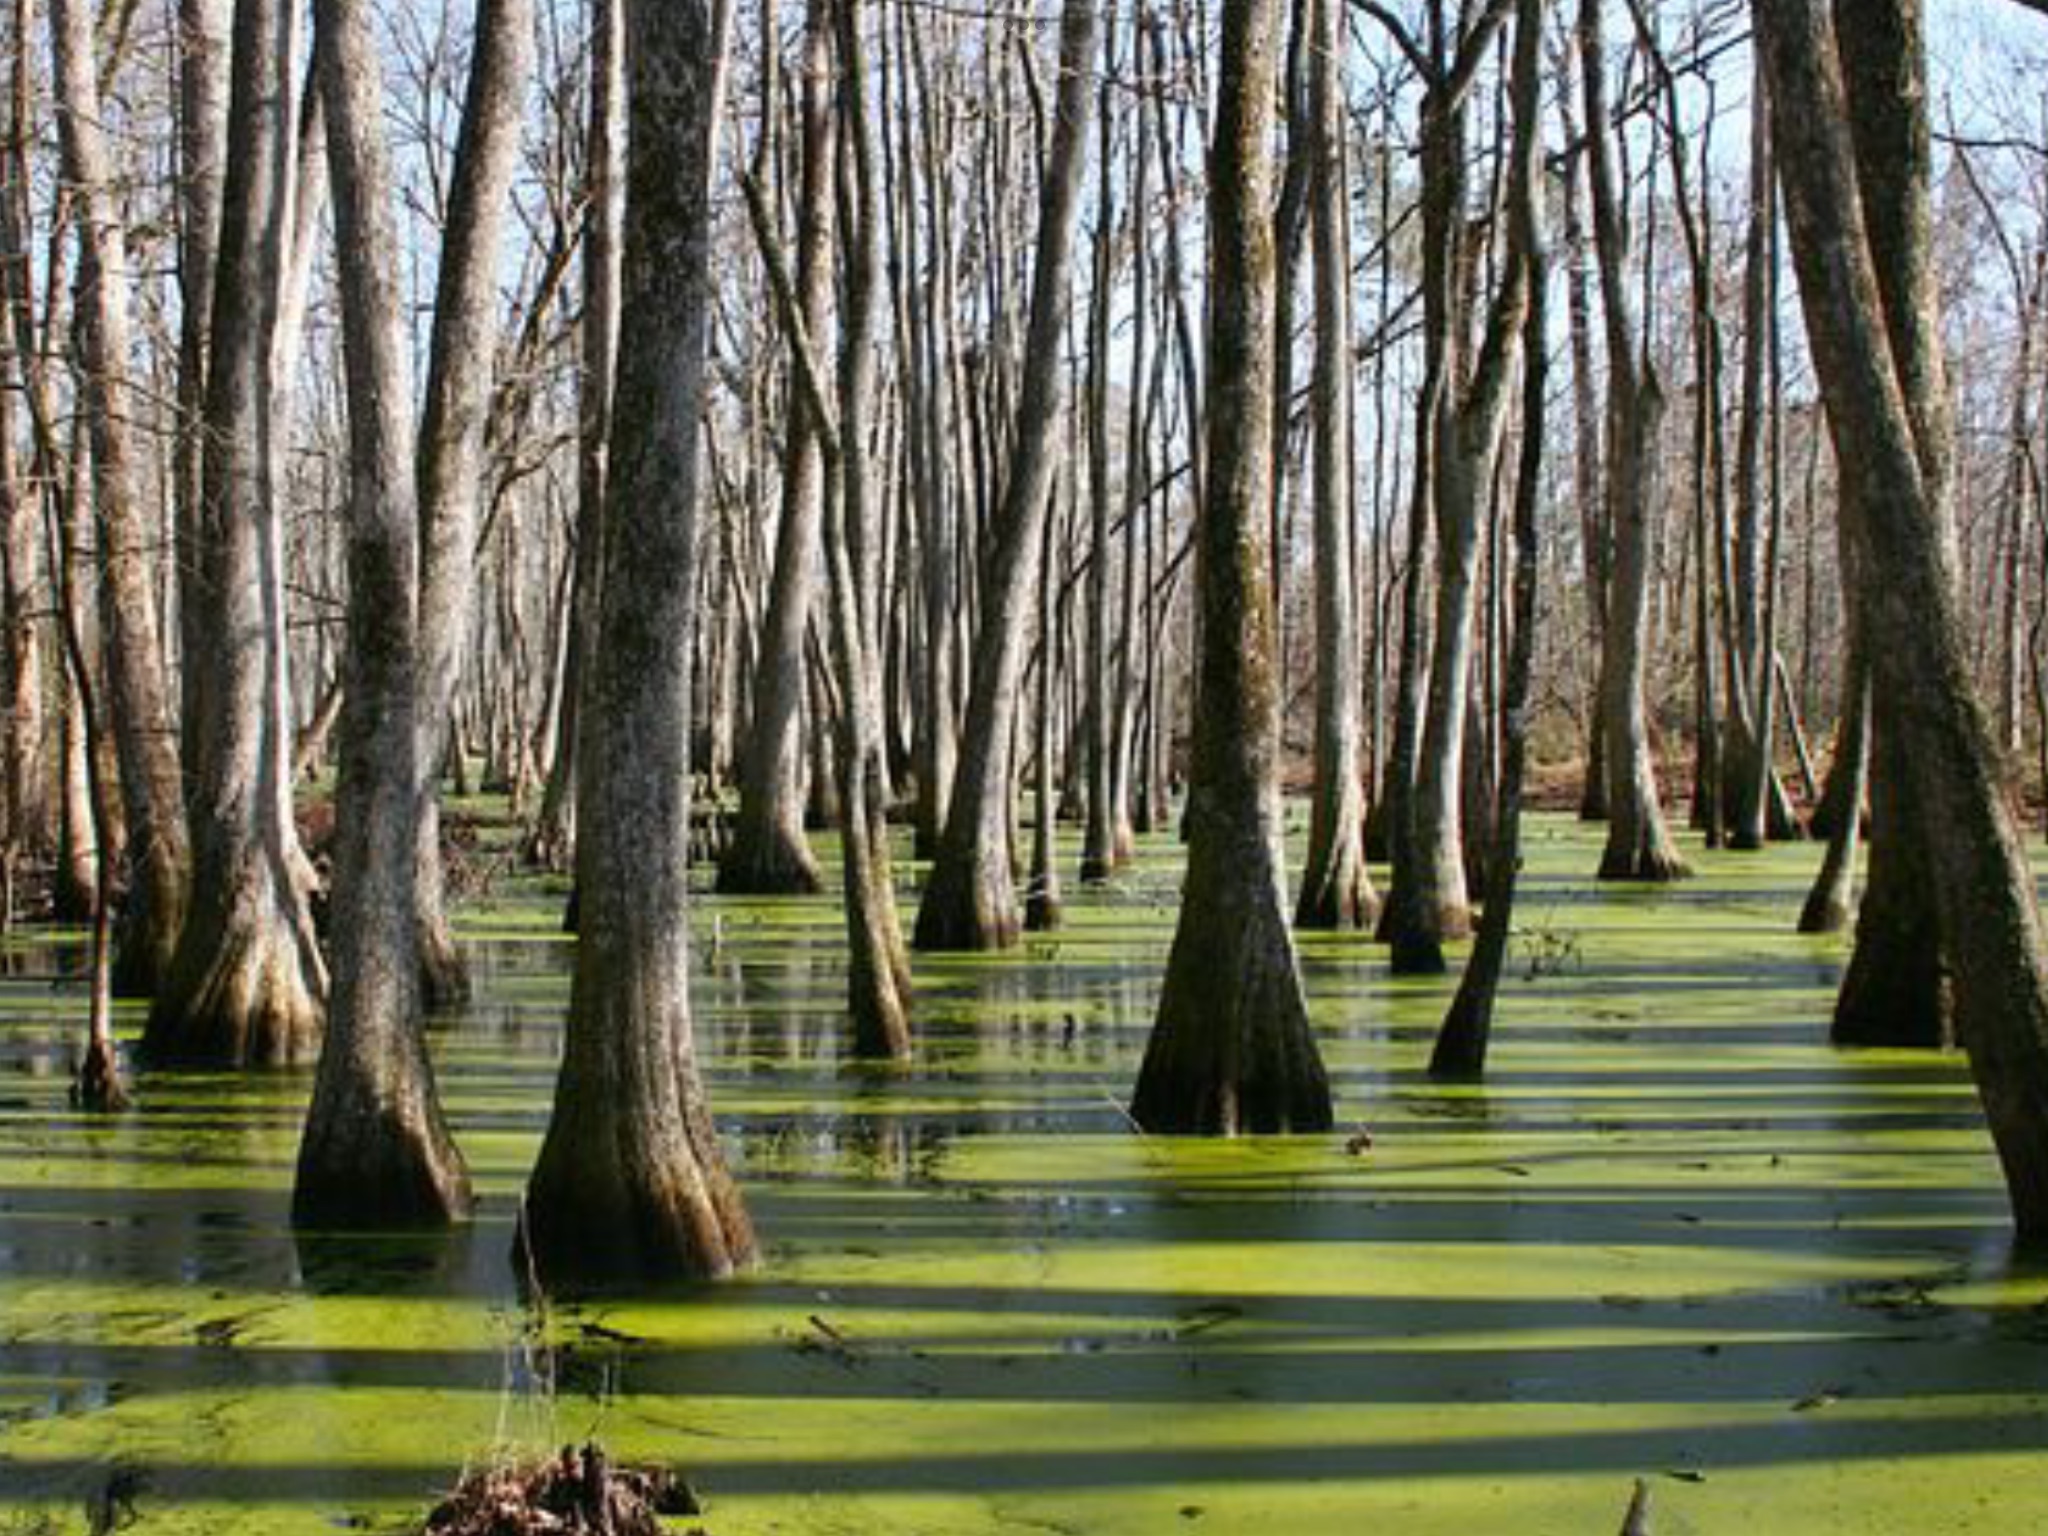 The Swamp Cypress